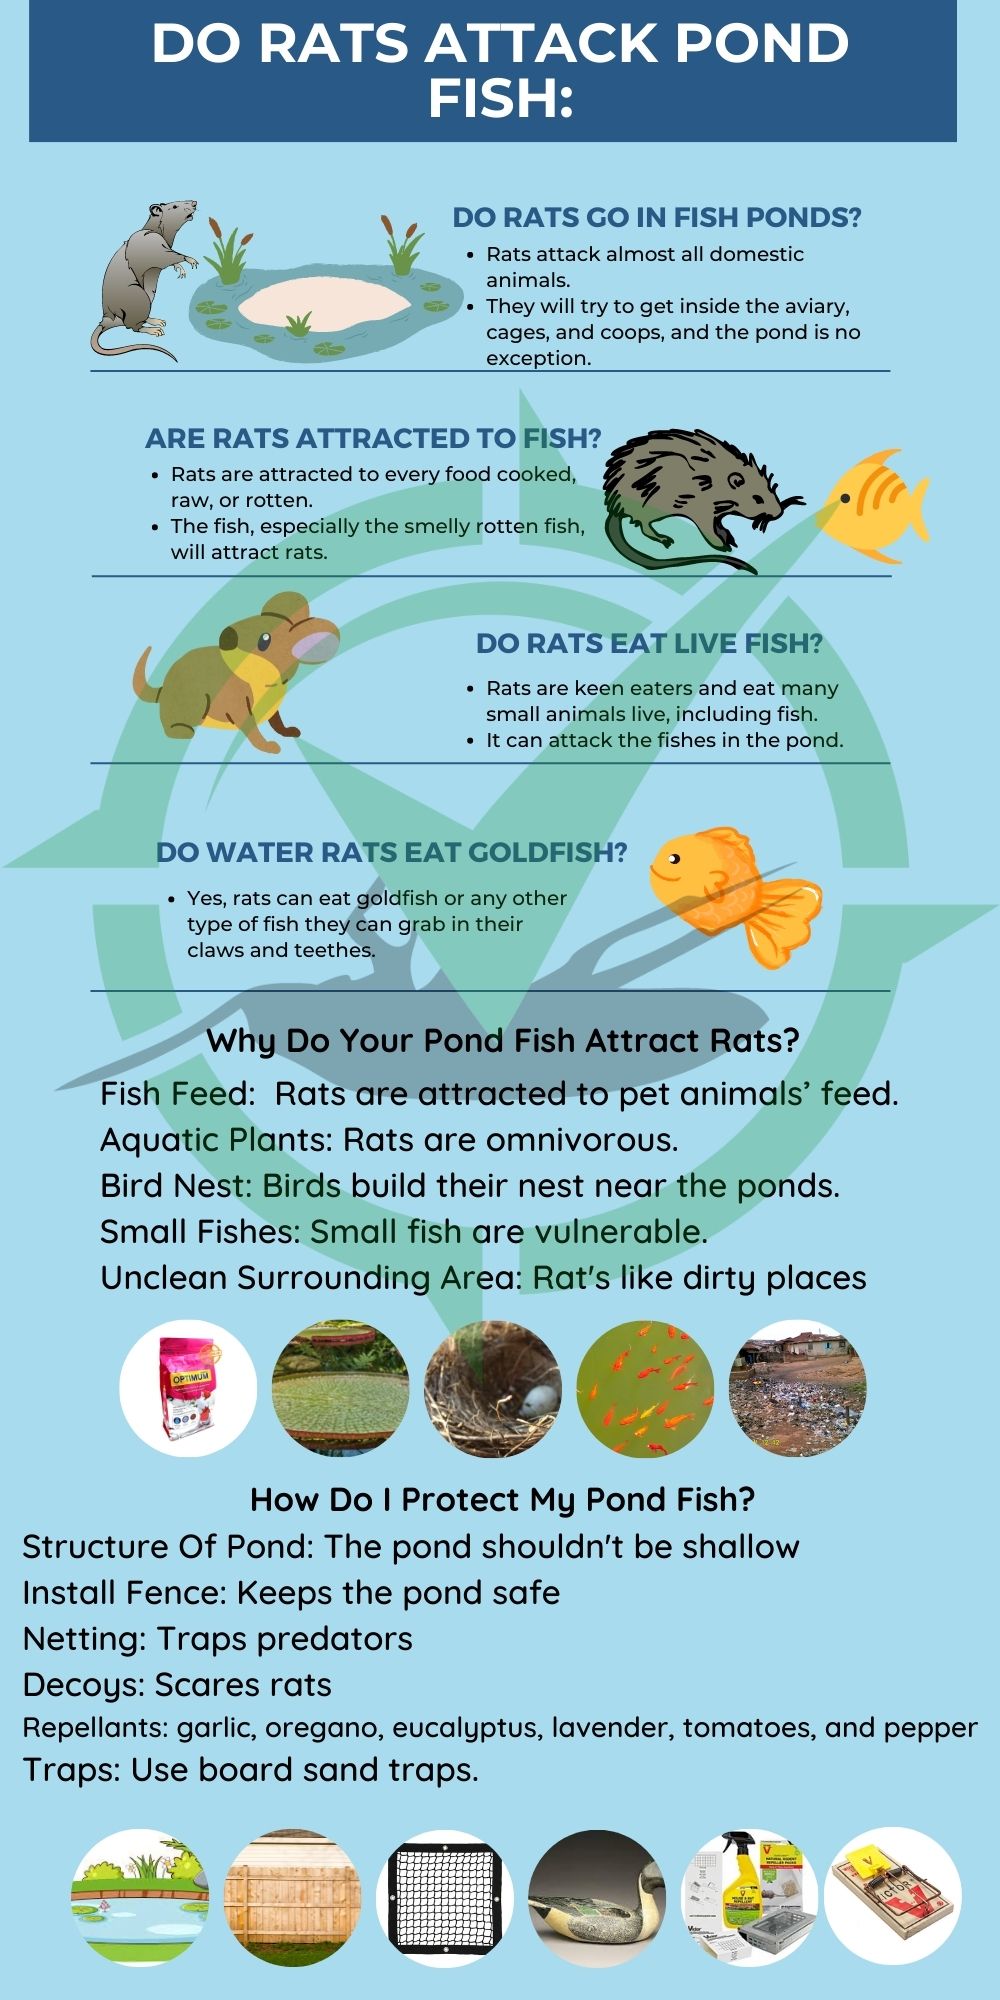 How To Stop Rats To Attack Pond Fish